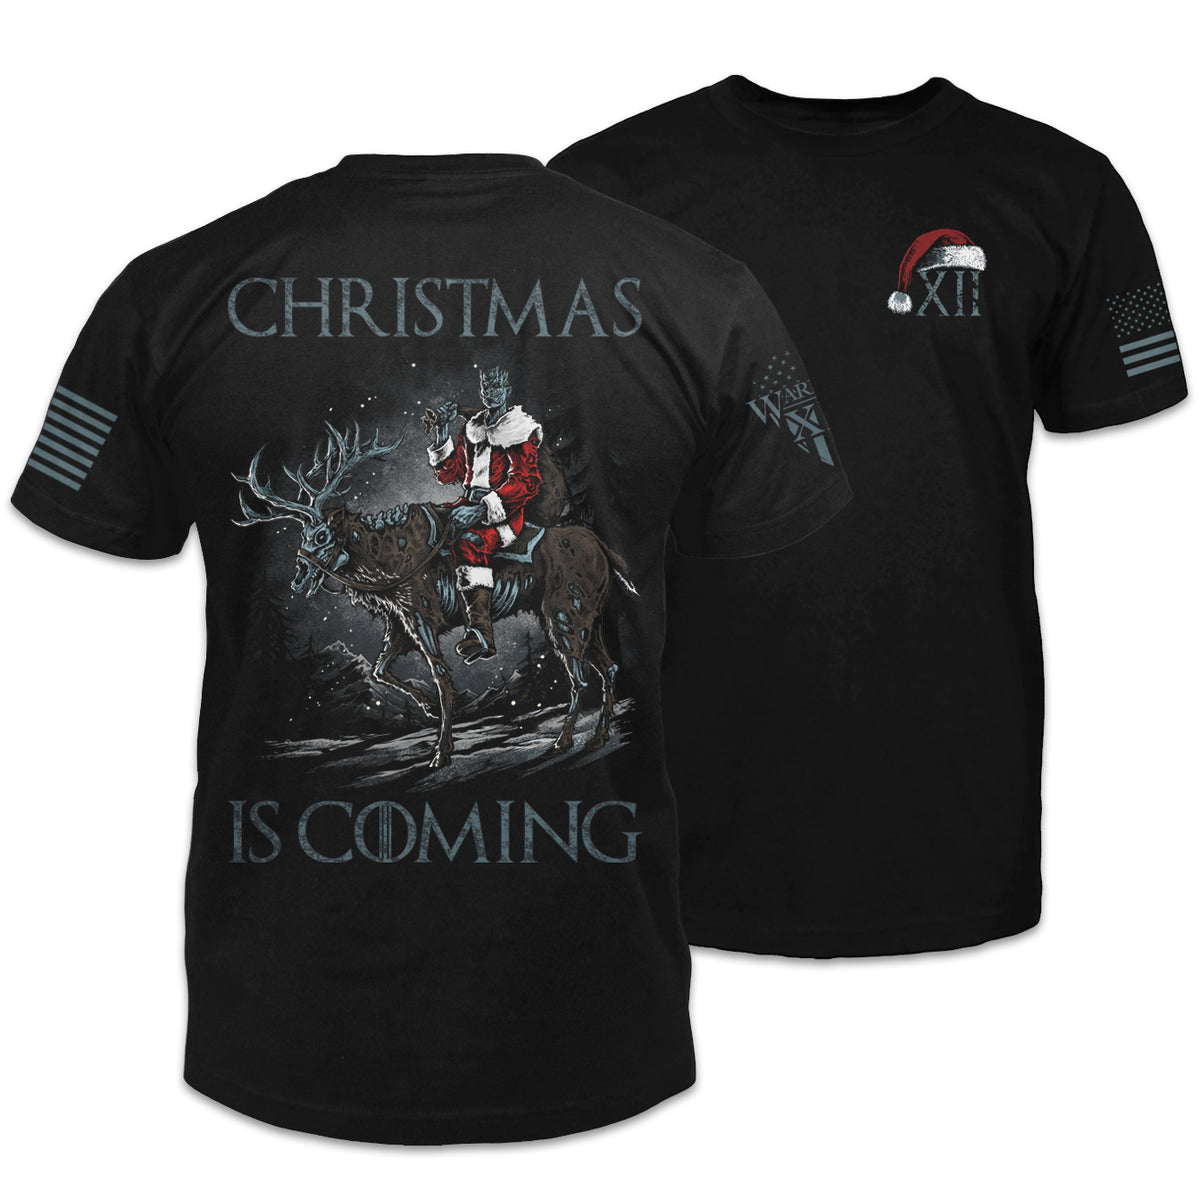 Front and back black t-shirt with the words "Christmas Is Coming" and a horse and figure dressed as santa claus.